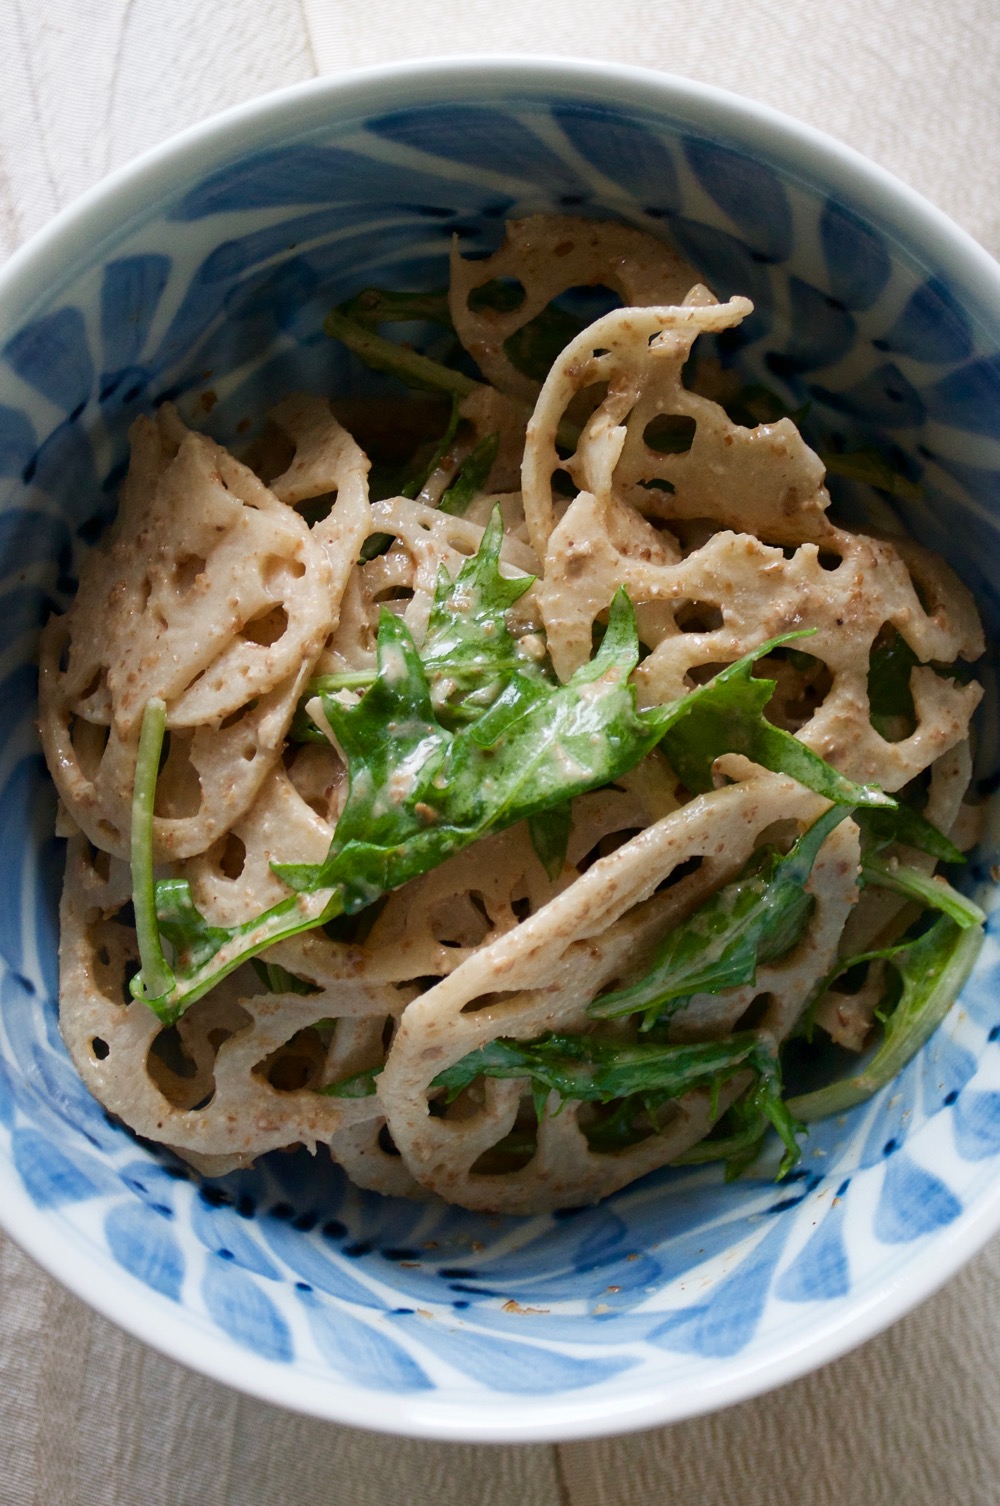 The lovely pattern of sliced lotus root with decorative mizuna leaves makes this salad very attractive. And the sesame sauce dressing makes it a perfect salad. The crunchiness of lotus root, the mild peppery flavour of mizuna, the lovely aroma of sesame…. It is such a simple salad to make but so yummy.